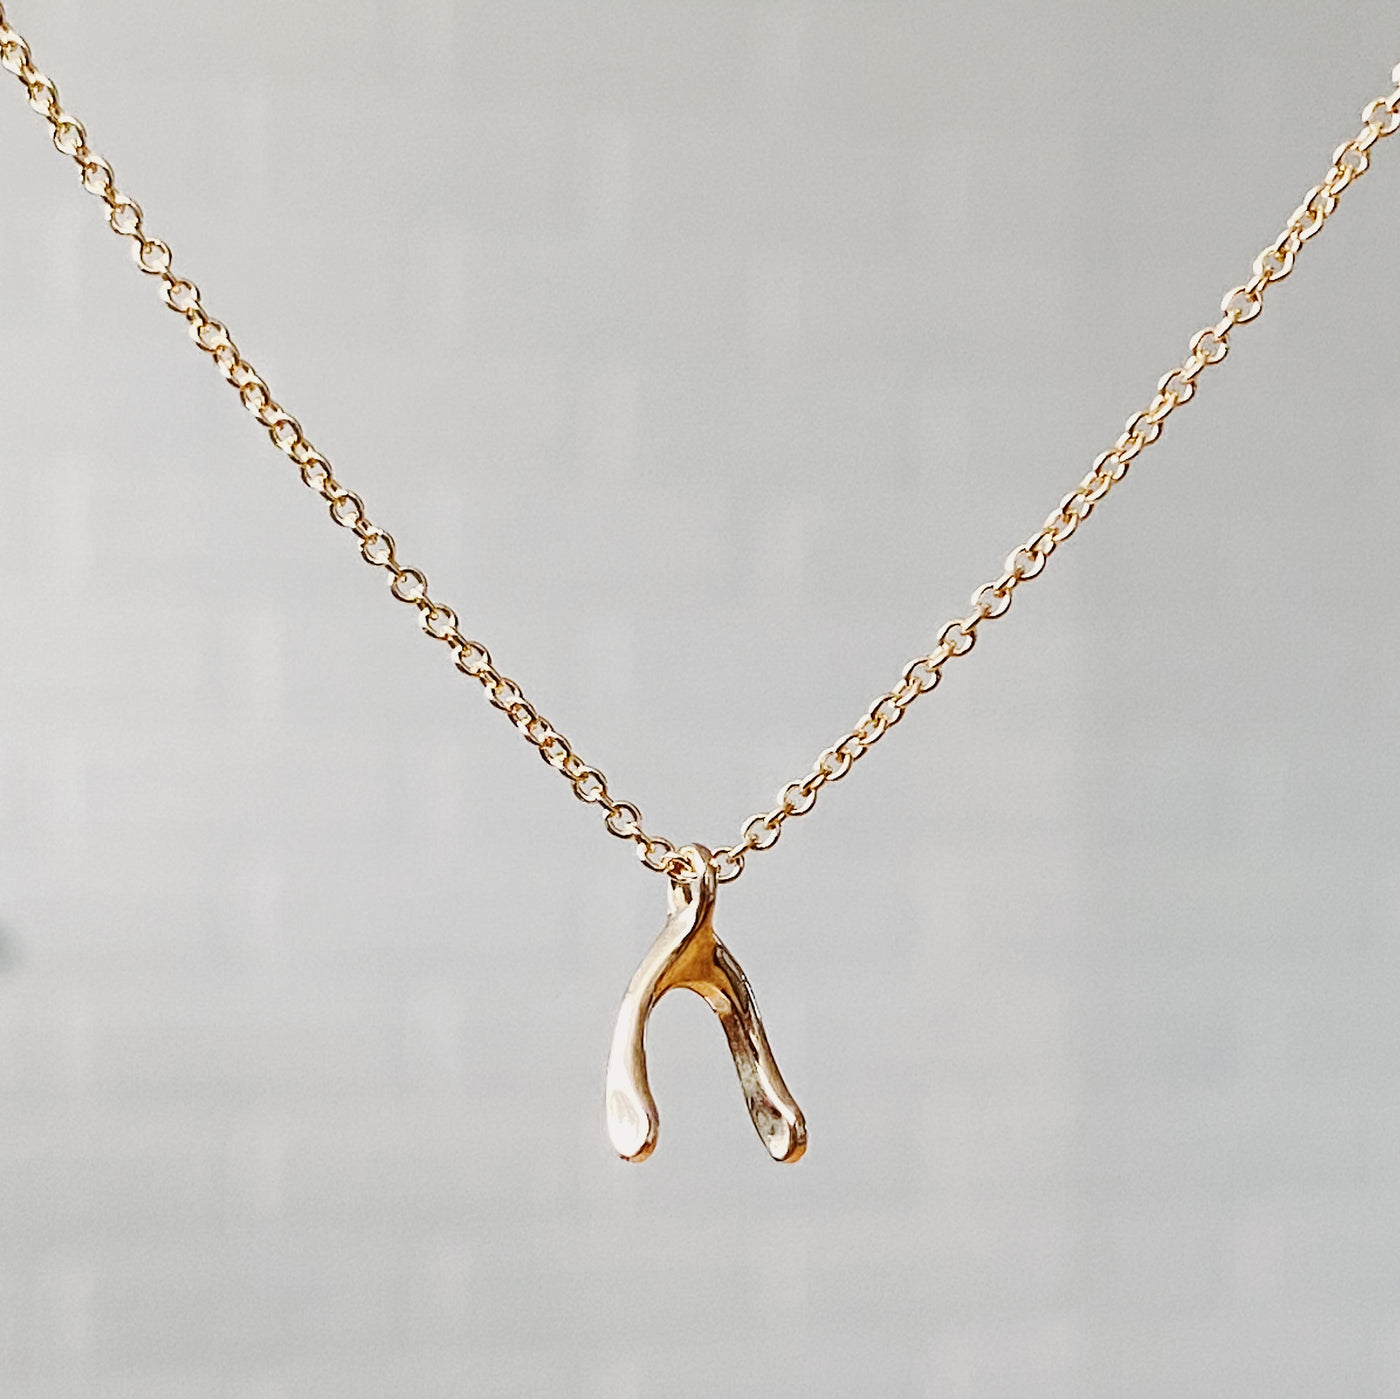 Gold Wishbone Necklace by Corey Egan side view in natural light